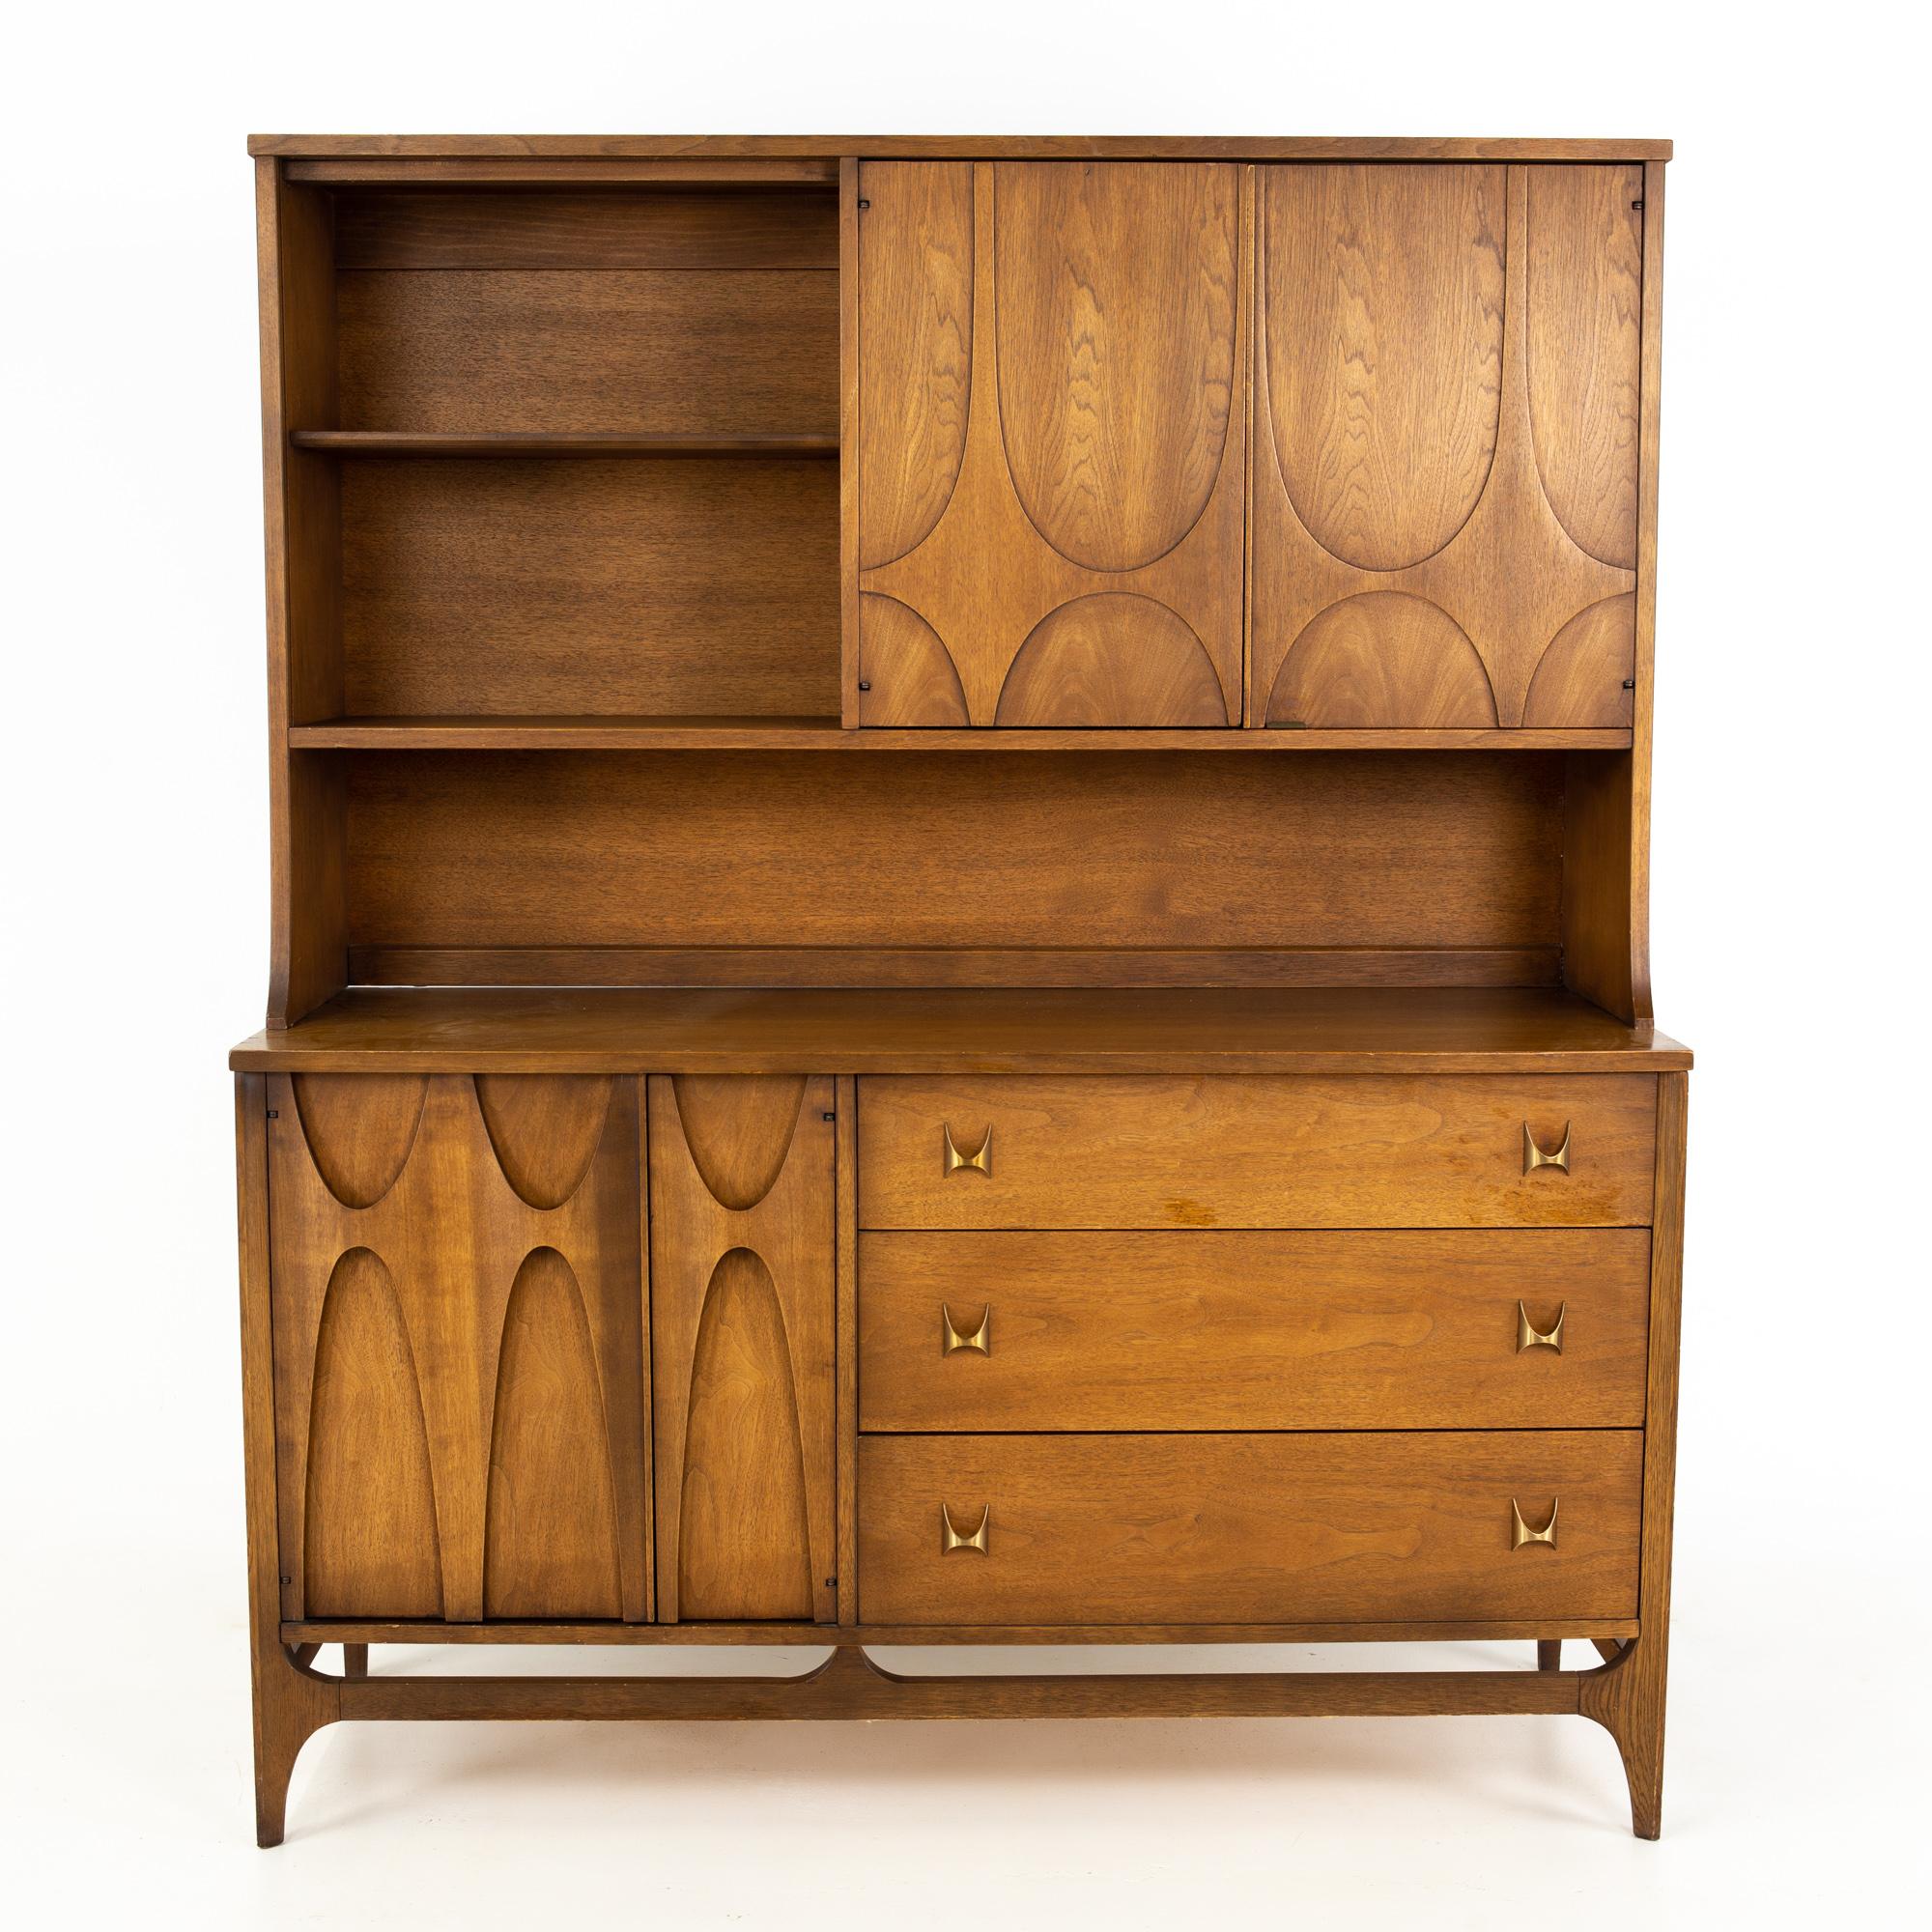 Broyhill Brasilia Brutalist mid-century walnut sideboard credenza buffet and Hutch

Buffet and hutch measures: 54 wide x 19 deep x 65 inches high

All pieces of furniture can be had in what we call restored vintage condition. That means the